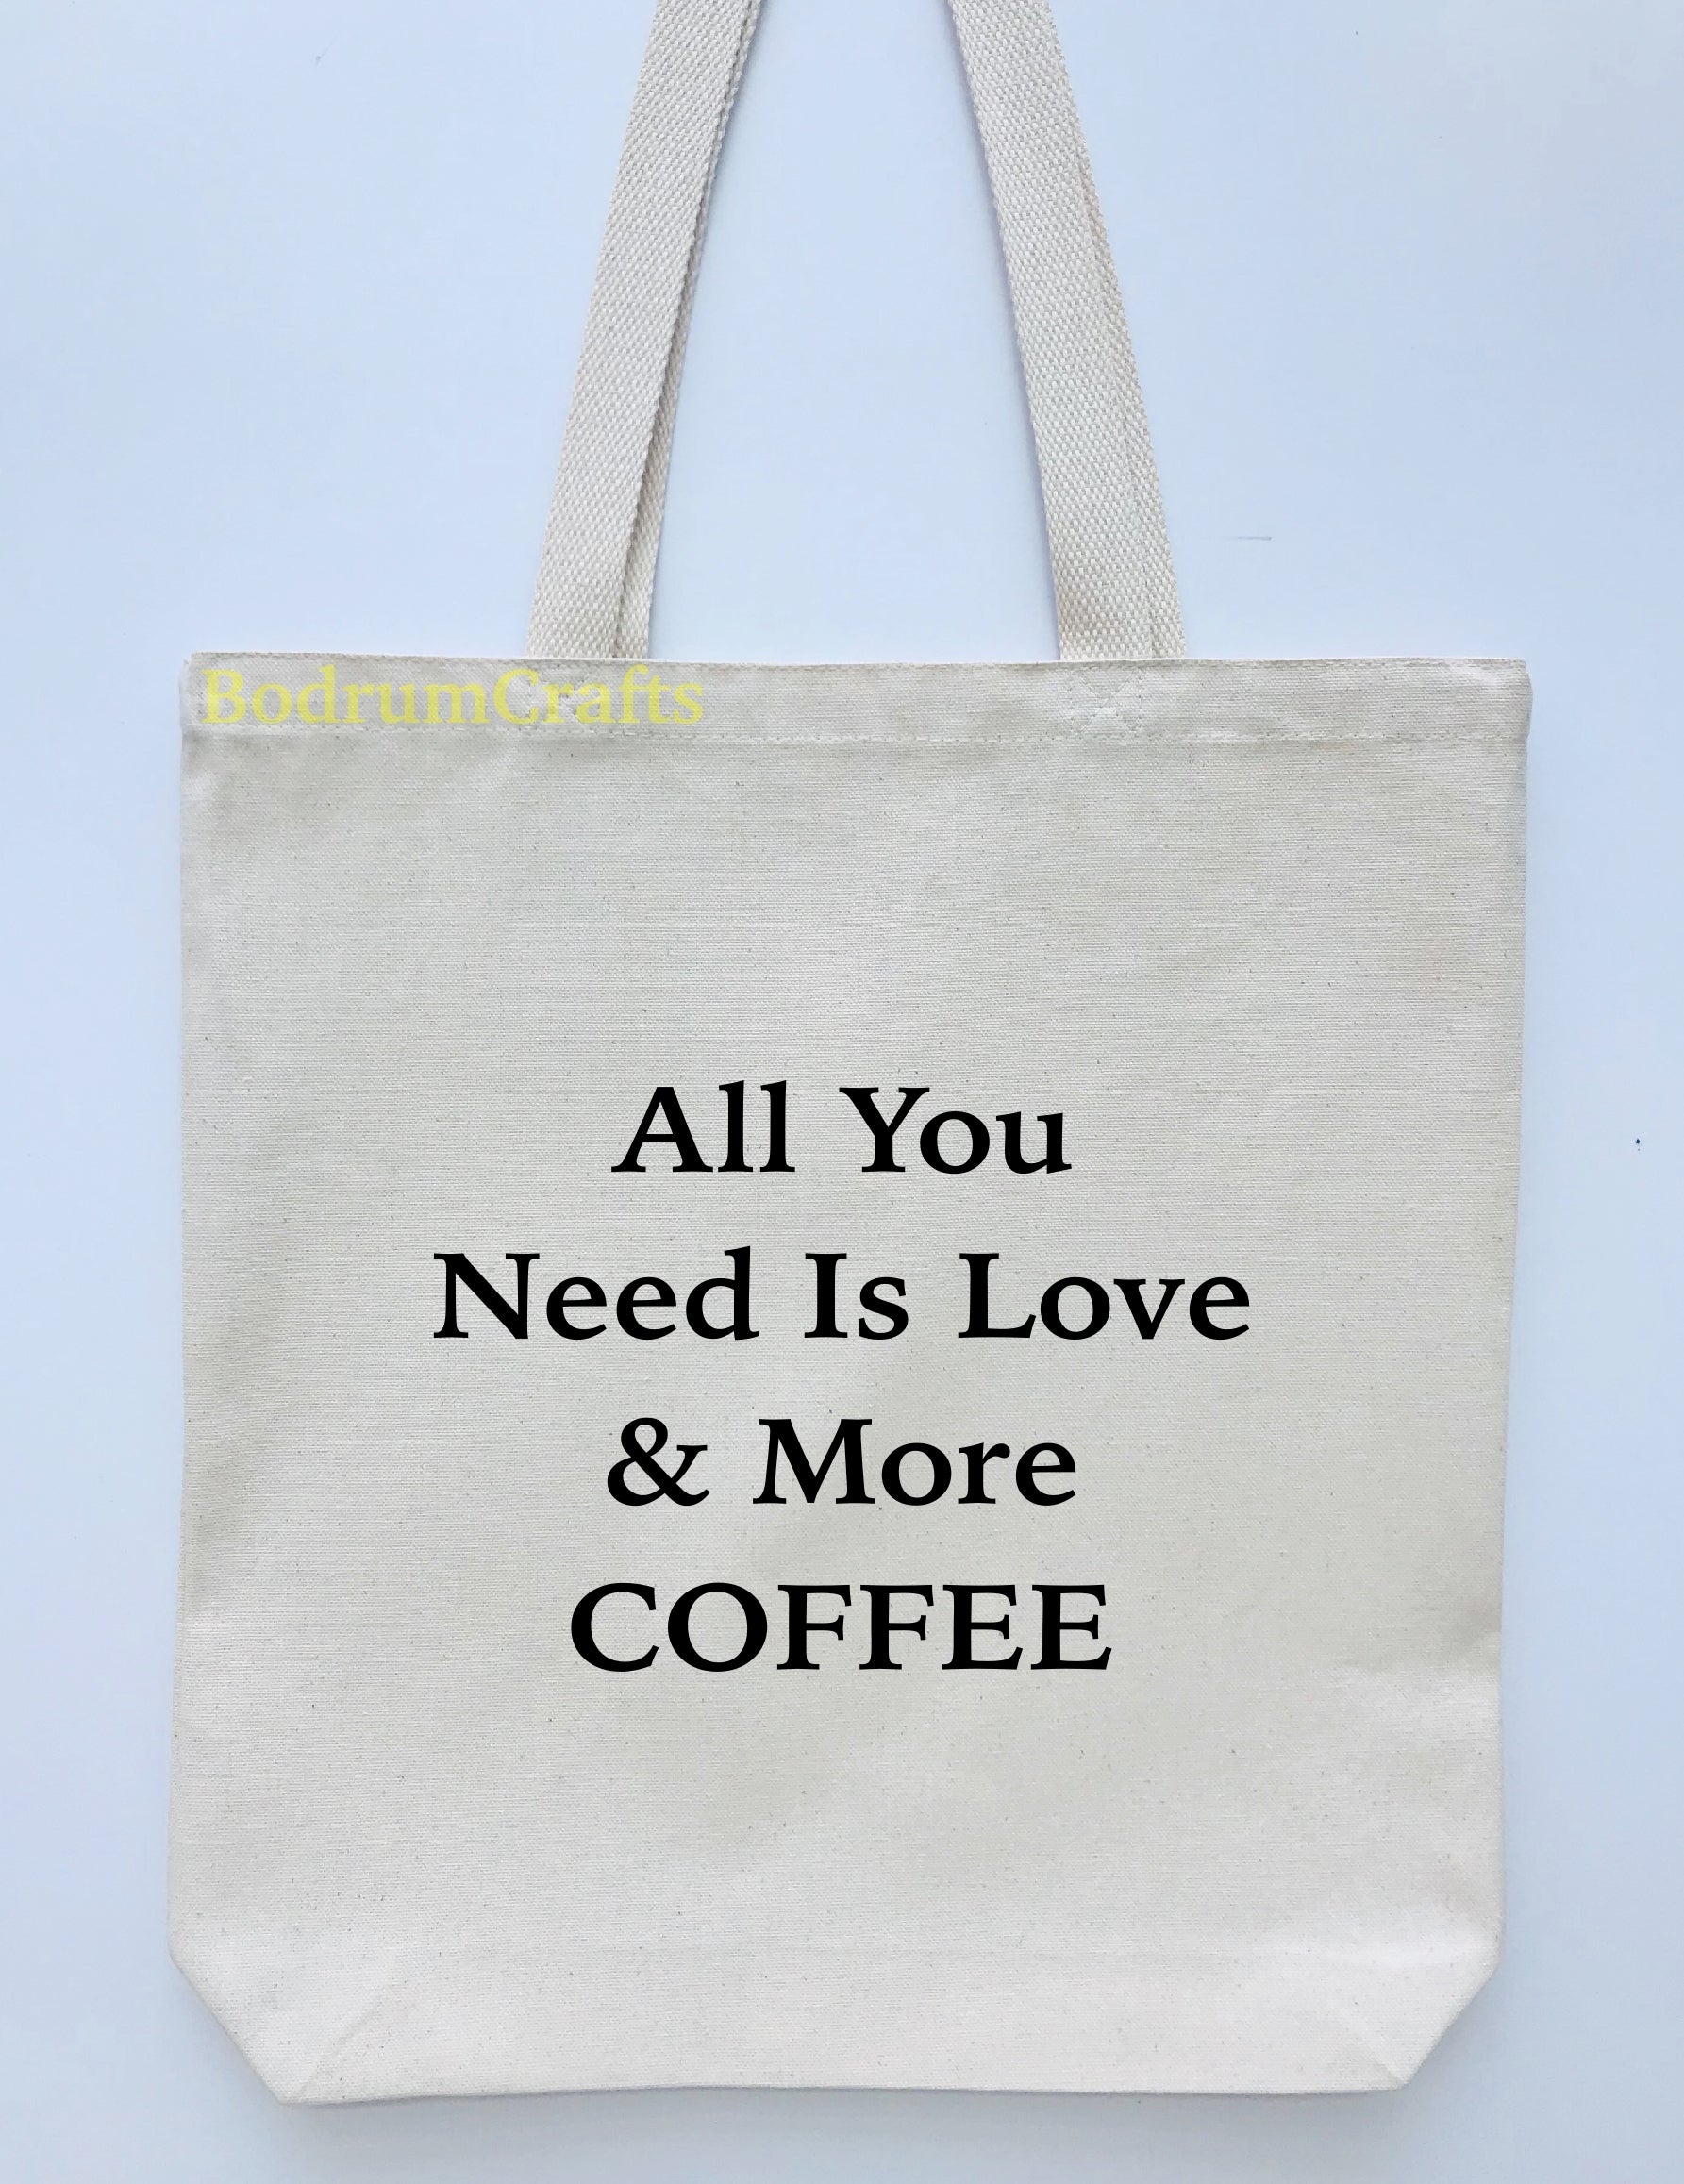 Coffee Design Printed Canvas Tote Bag, All You Need Is Love & More Coffee